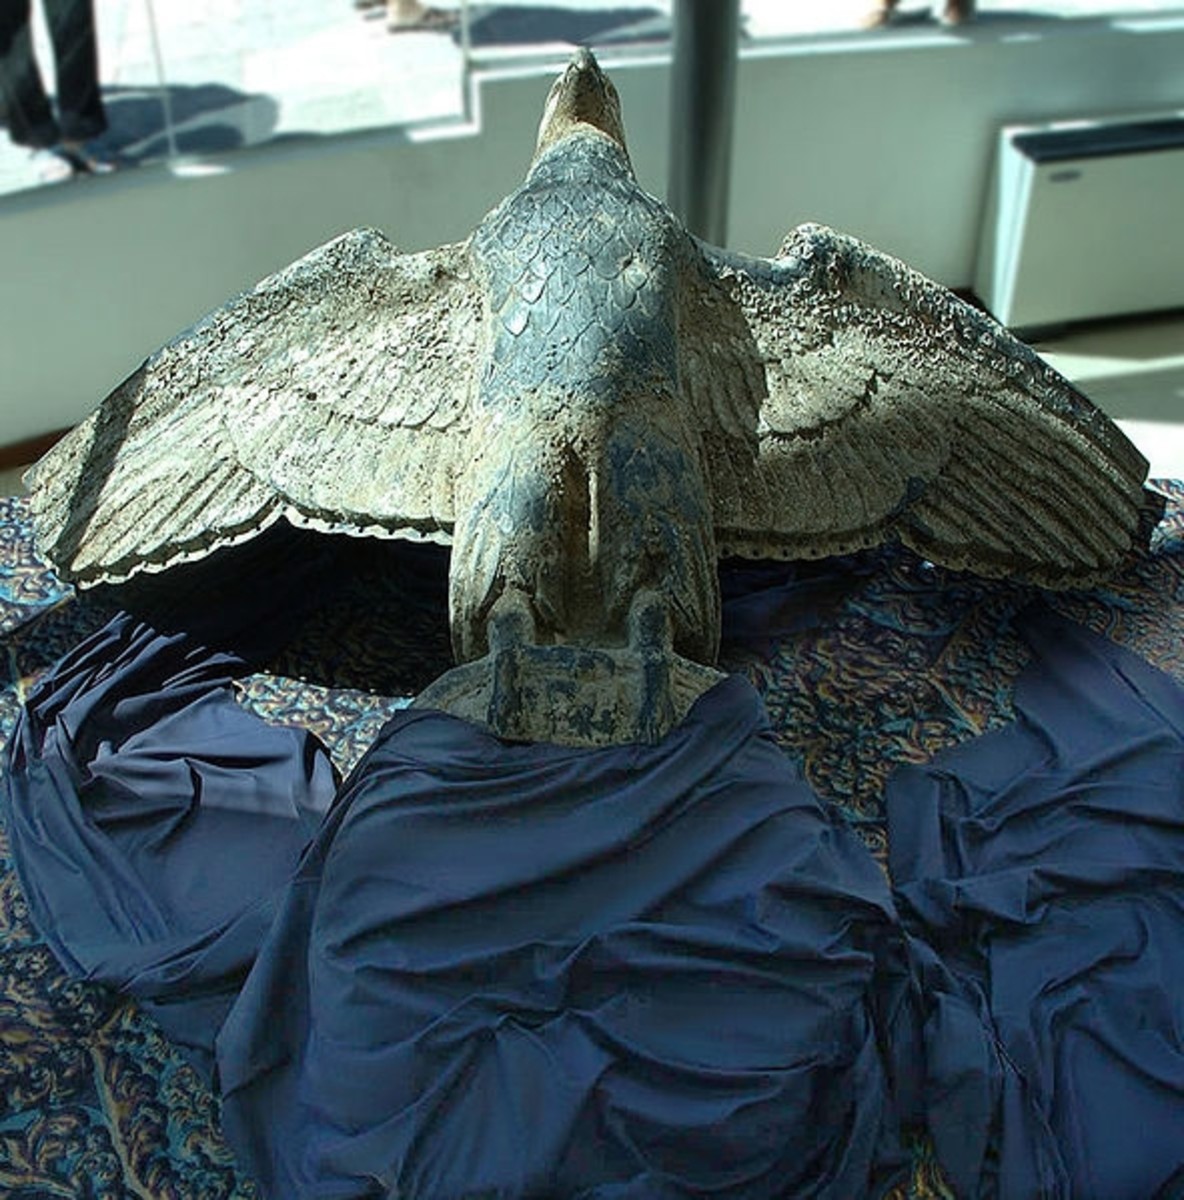 Bronze eagle from stern of Graf Spee (Nazi symbol covered)